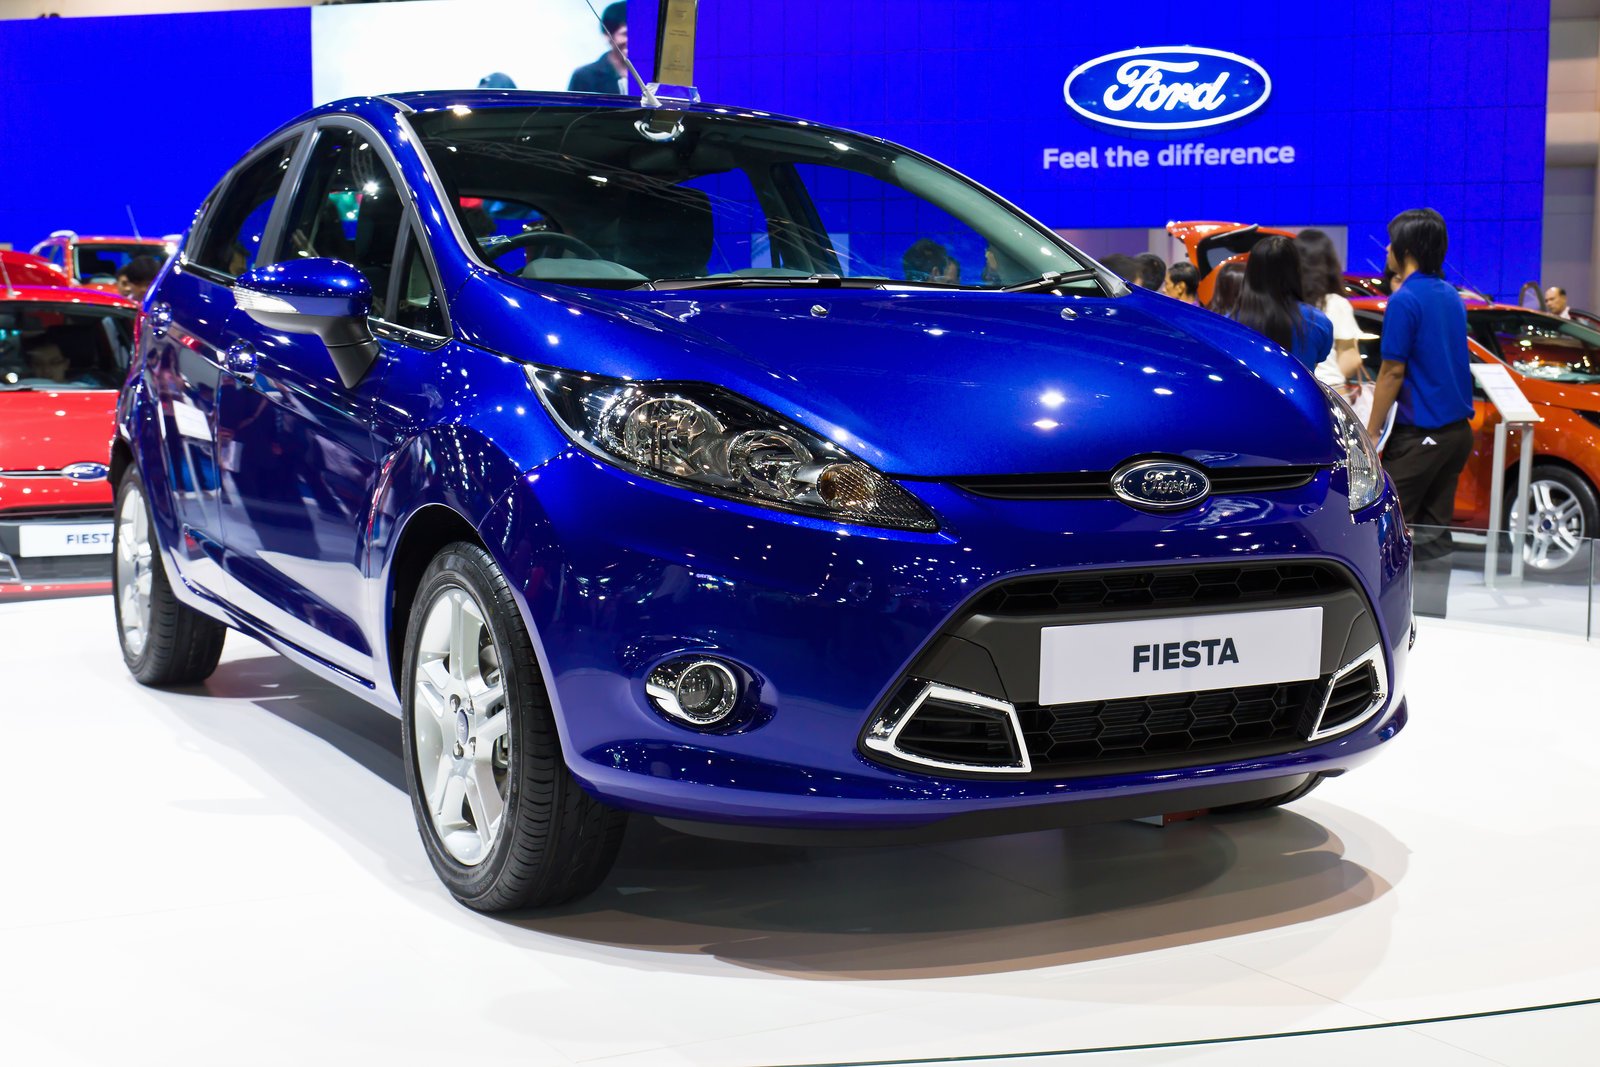 <p><span>The Ford Fiesta sounds like a fun little car! But hey, even cool cars can have baggage (according to the car experts). Suspension wear, fluid leaks, and corroded parts are common culprits, and <a href="https://www.miramarspeedcircuit.com/ford-fiesta-years-avoid/">fixing these in Fiesta cars can cost a lot</a>. So, before you hit the road, buckle up for potential maintenance costs that could put a dent in your plans.</span></p>